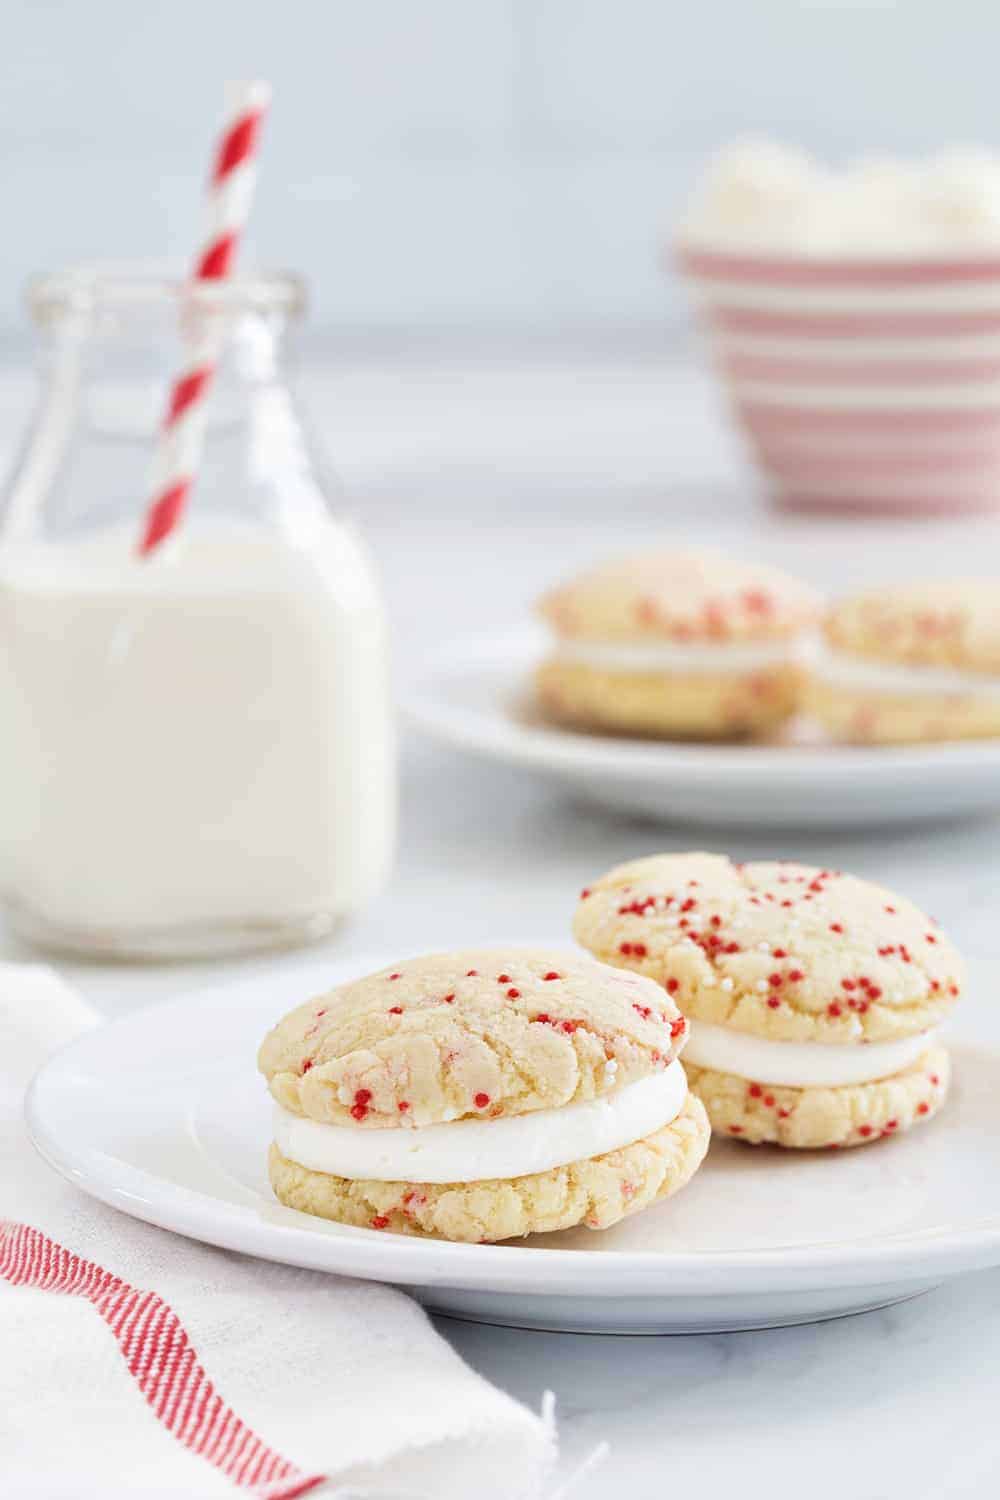 Easy Sugar Cookies come together in a snap! No chilling, rolling, or cookie cutters required! If you love sugar cookies, you have to try these!